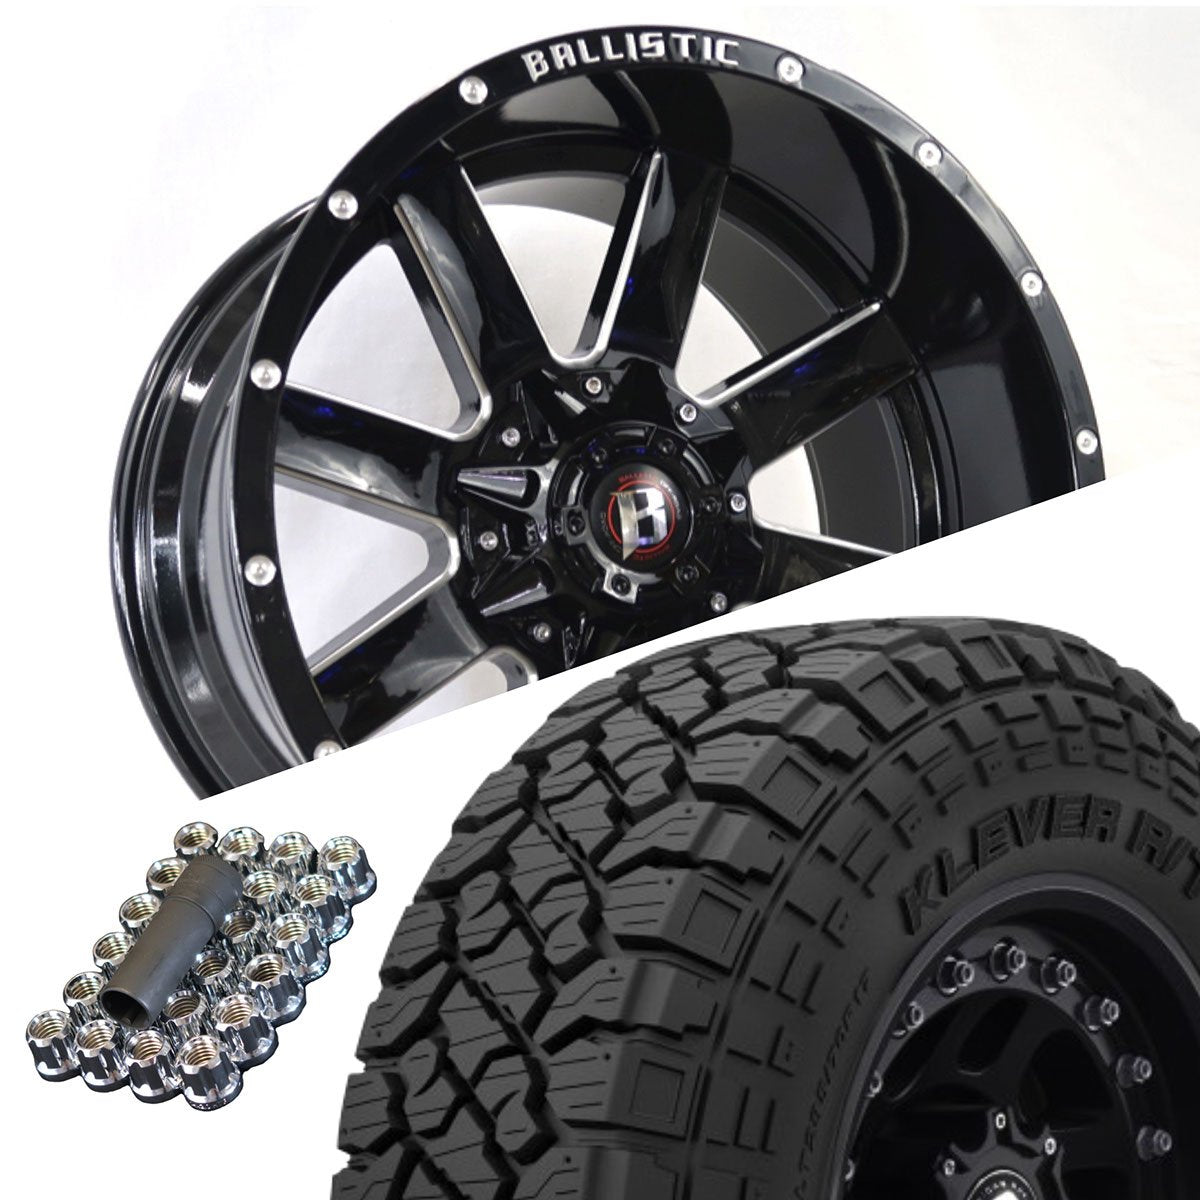 Ballistic 959 20x12 ET-44 8x170/8x180 Gloss Black Milled (Wheel and Tire Package)